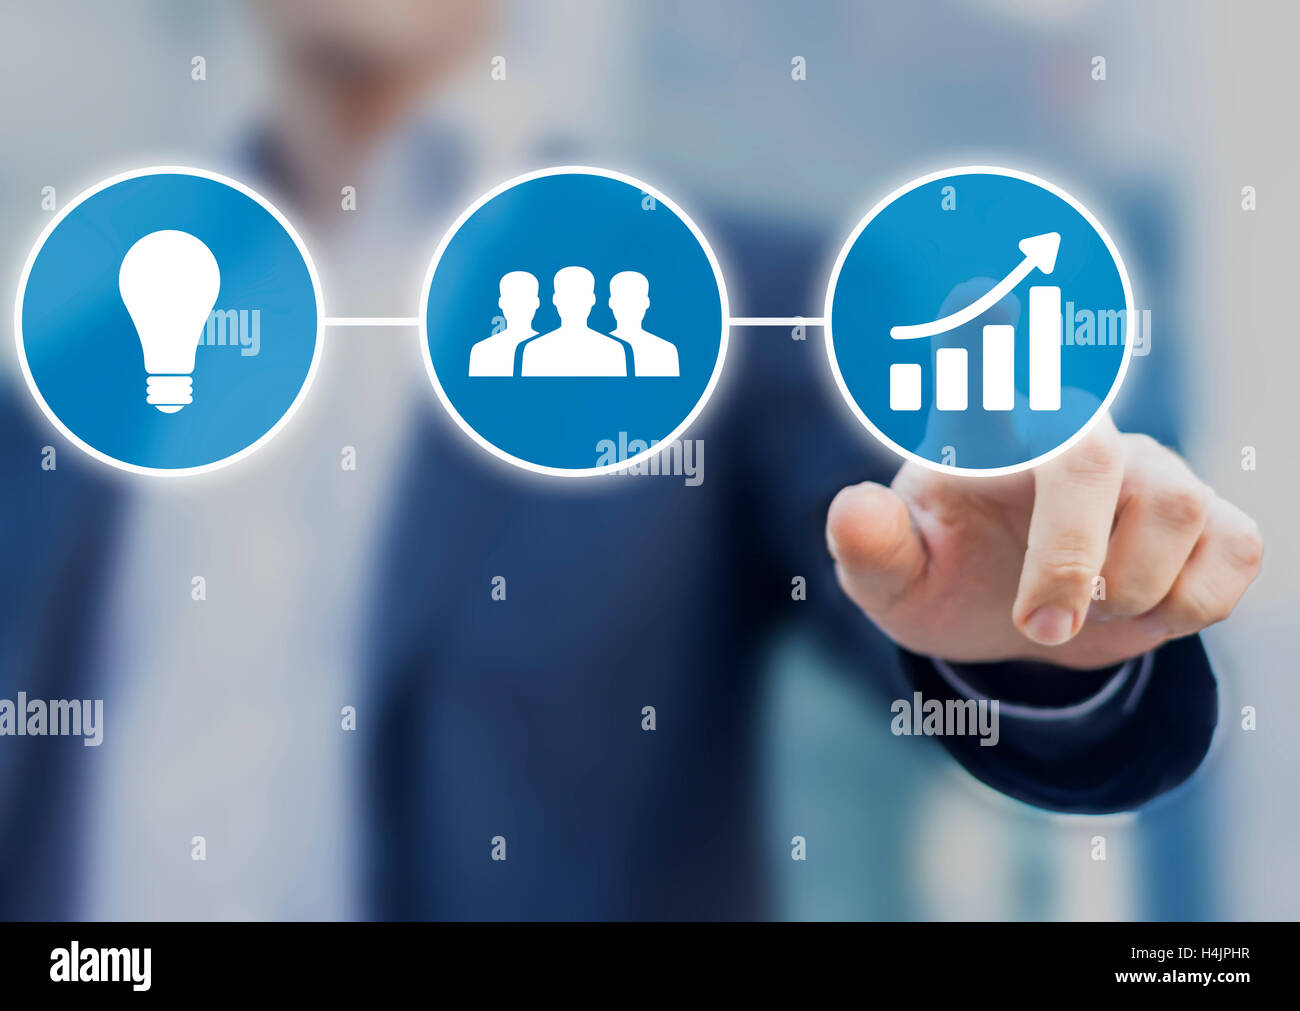 Success in business originates from innovative ideas implemented by a team of motivated people. Concept with modern icons Stock Photo